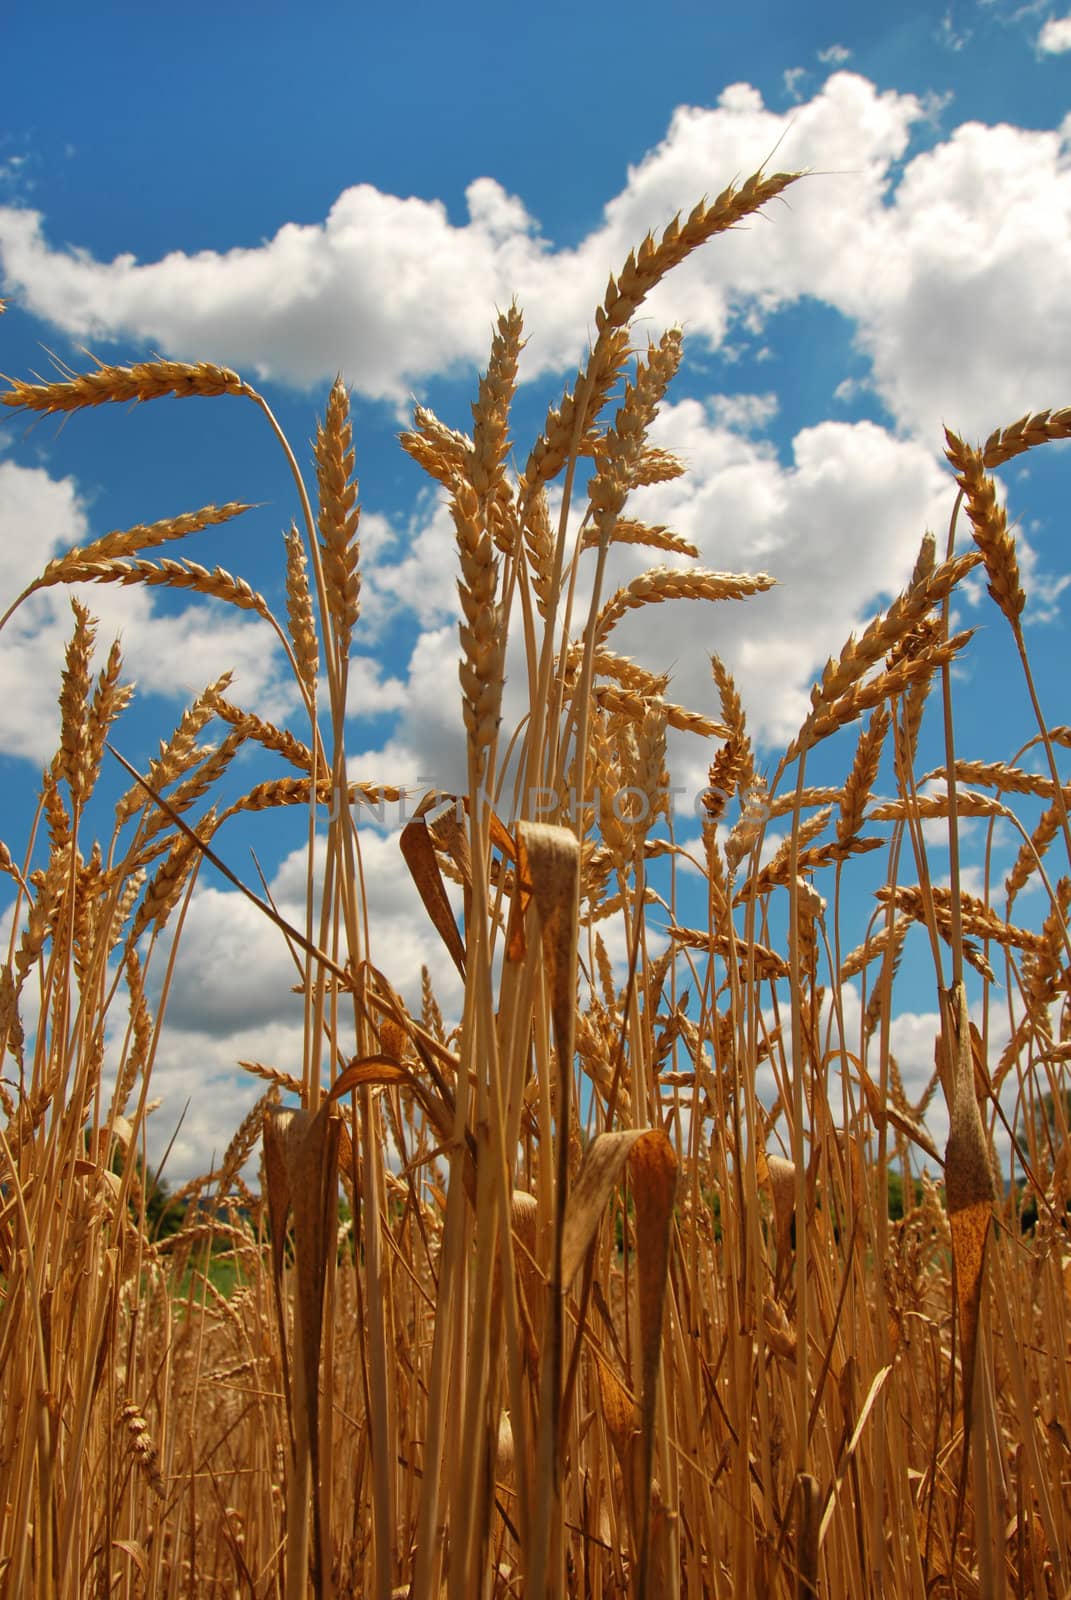 yellow wheat plant on field over scenic blue sky